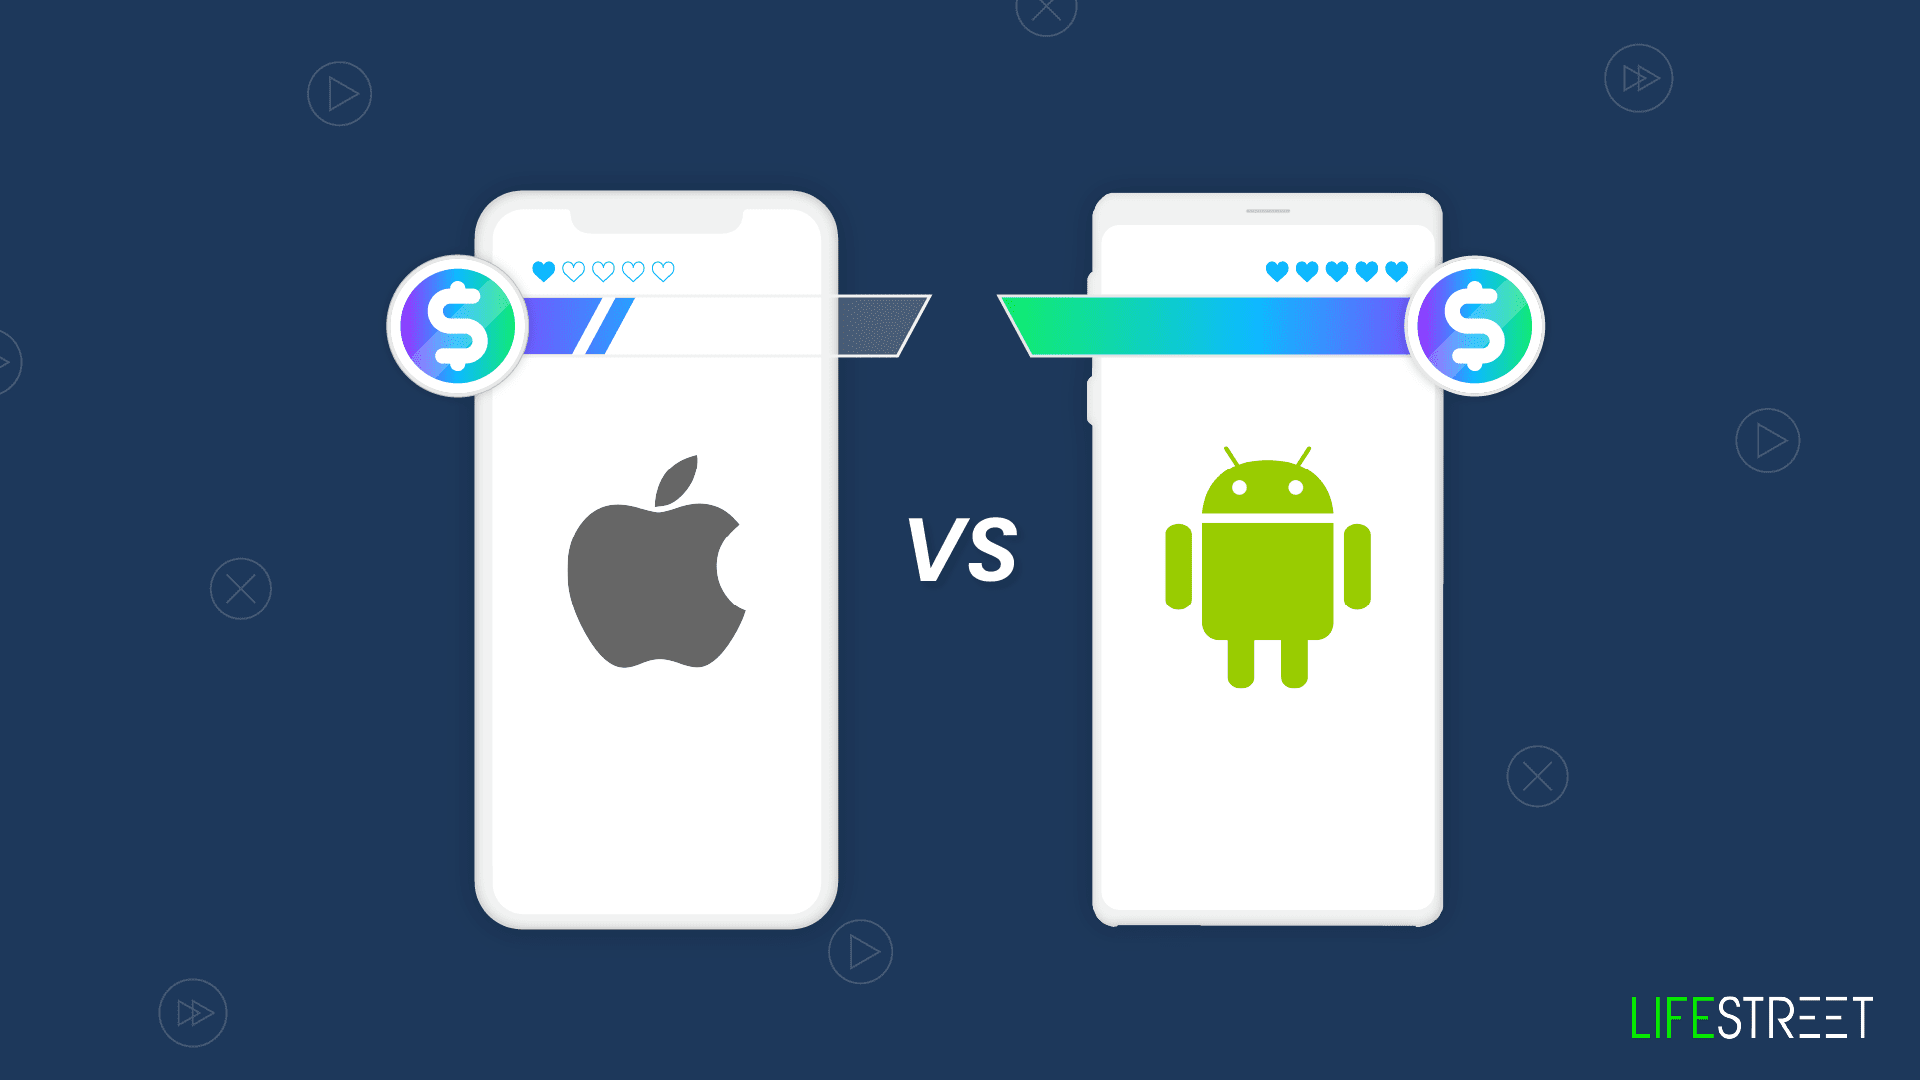 Apple vs. Android